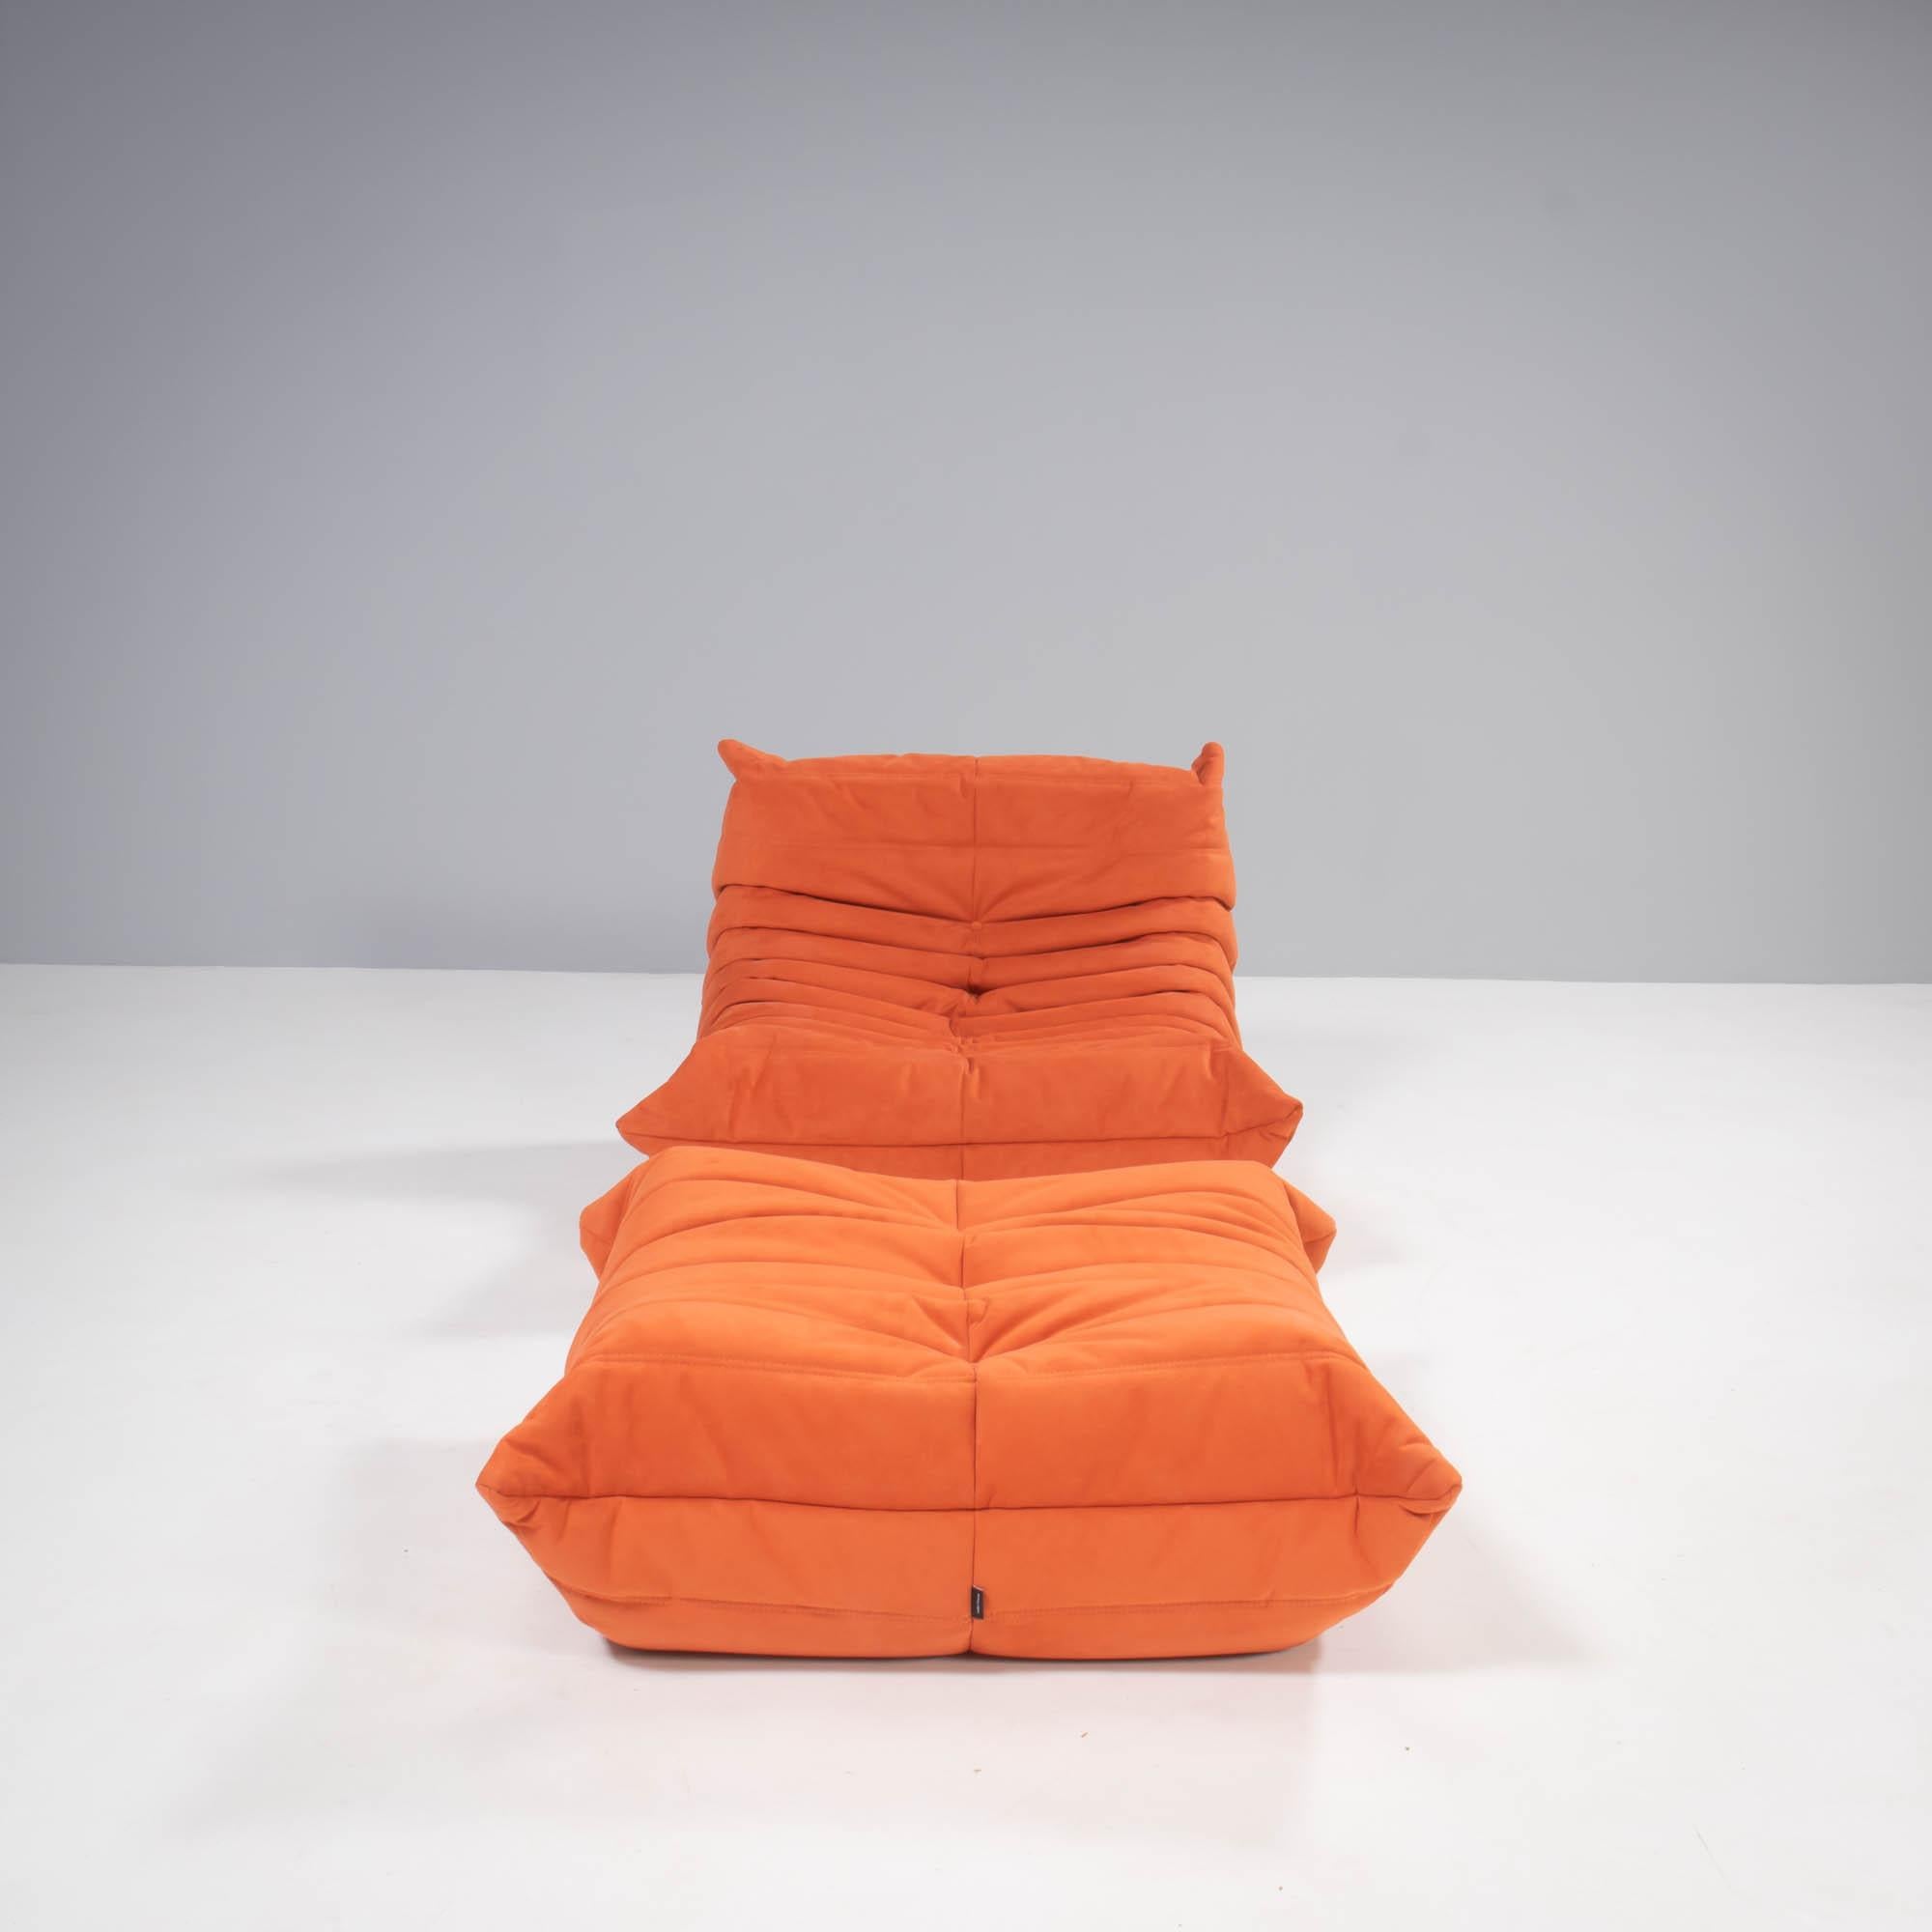 The iconic Togo cadmium orange sofa, originally designed by Michel Ducaroy for Ligne Roset in 1973, has become a design mid century Classic.

This fireside armchair and footstool is incredibly versatile and can be used alone or paired with other